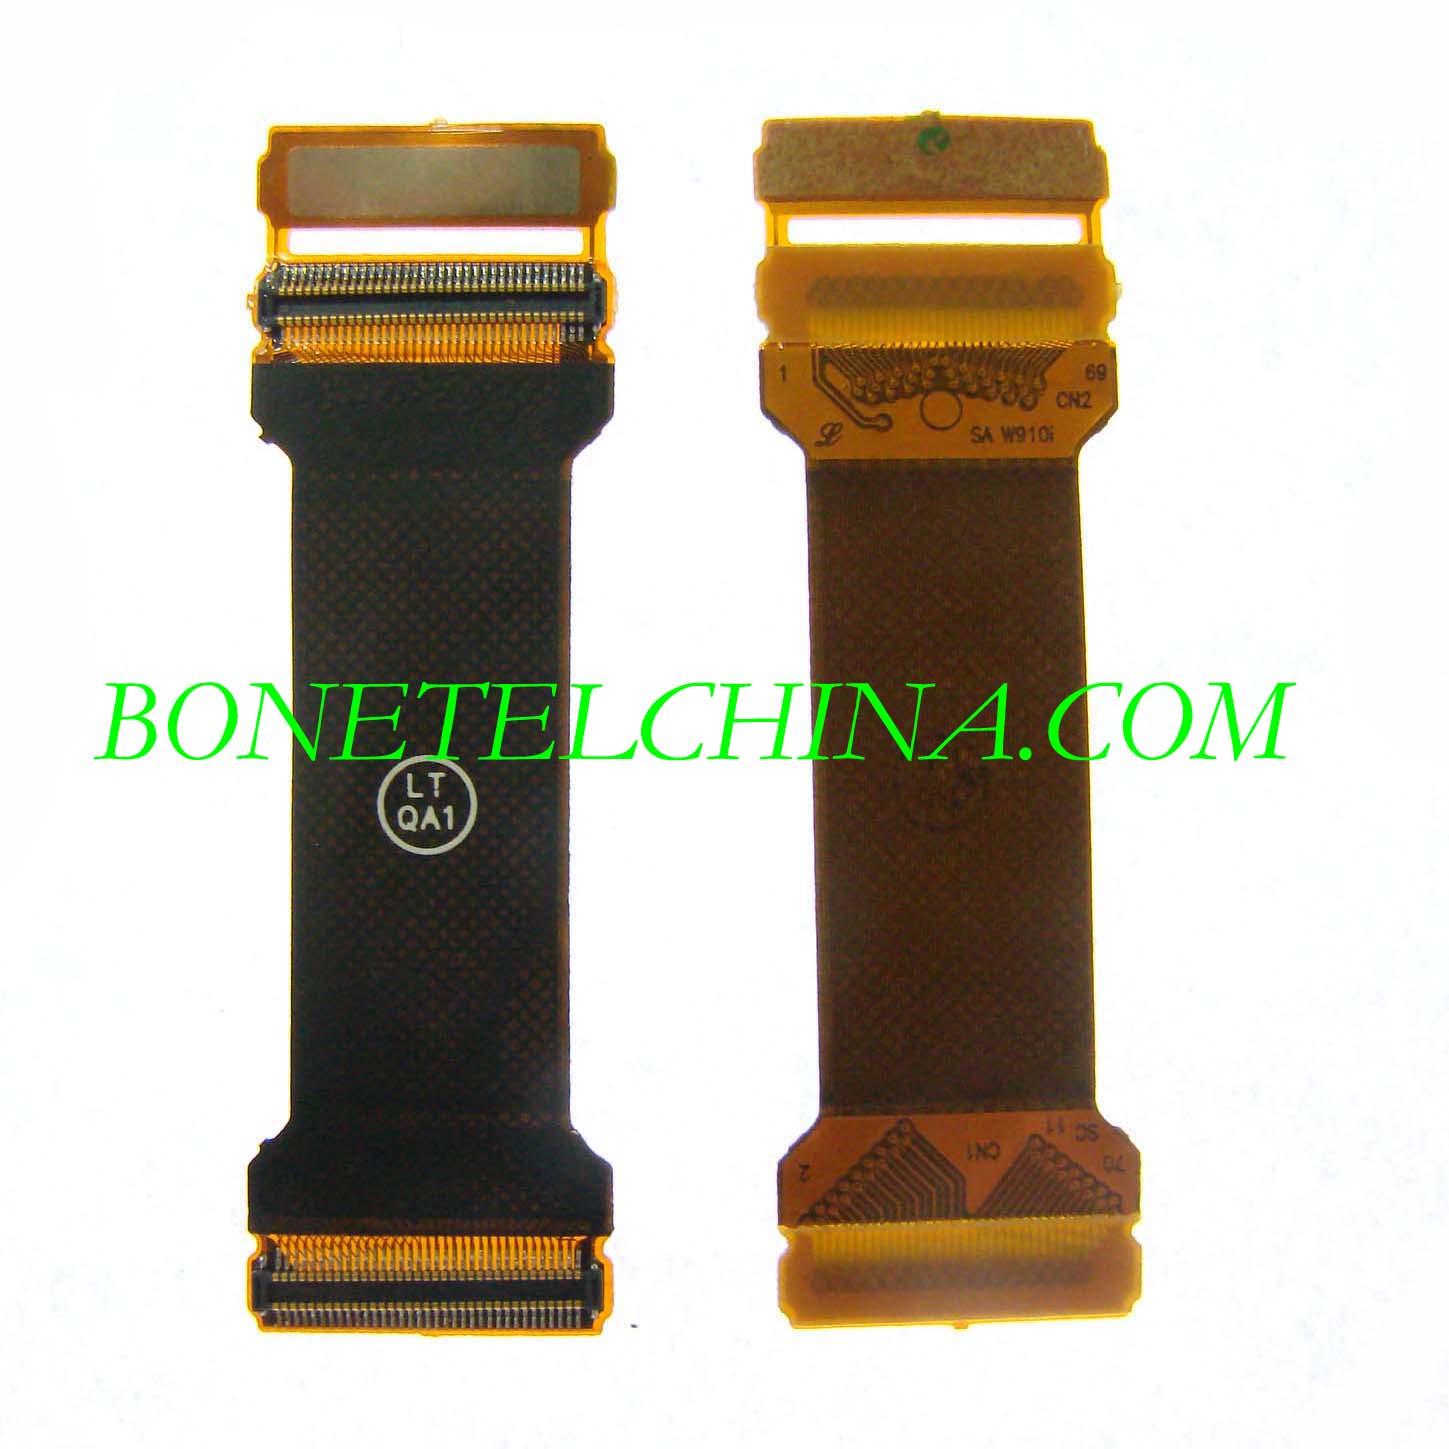 W910 main board Mobile phone Flex Cables for Sony Ericsson